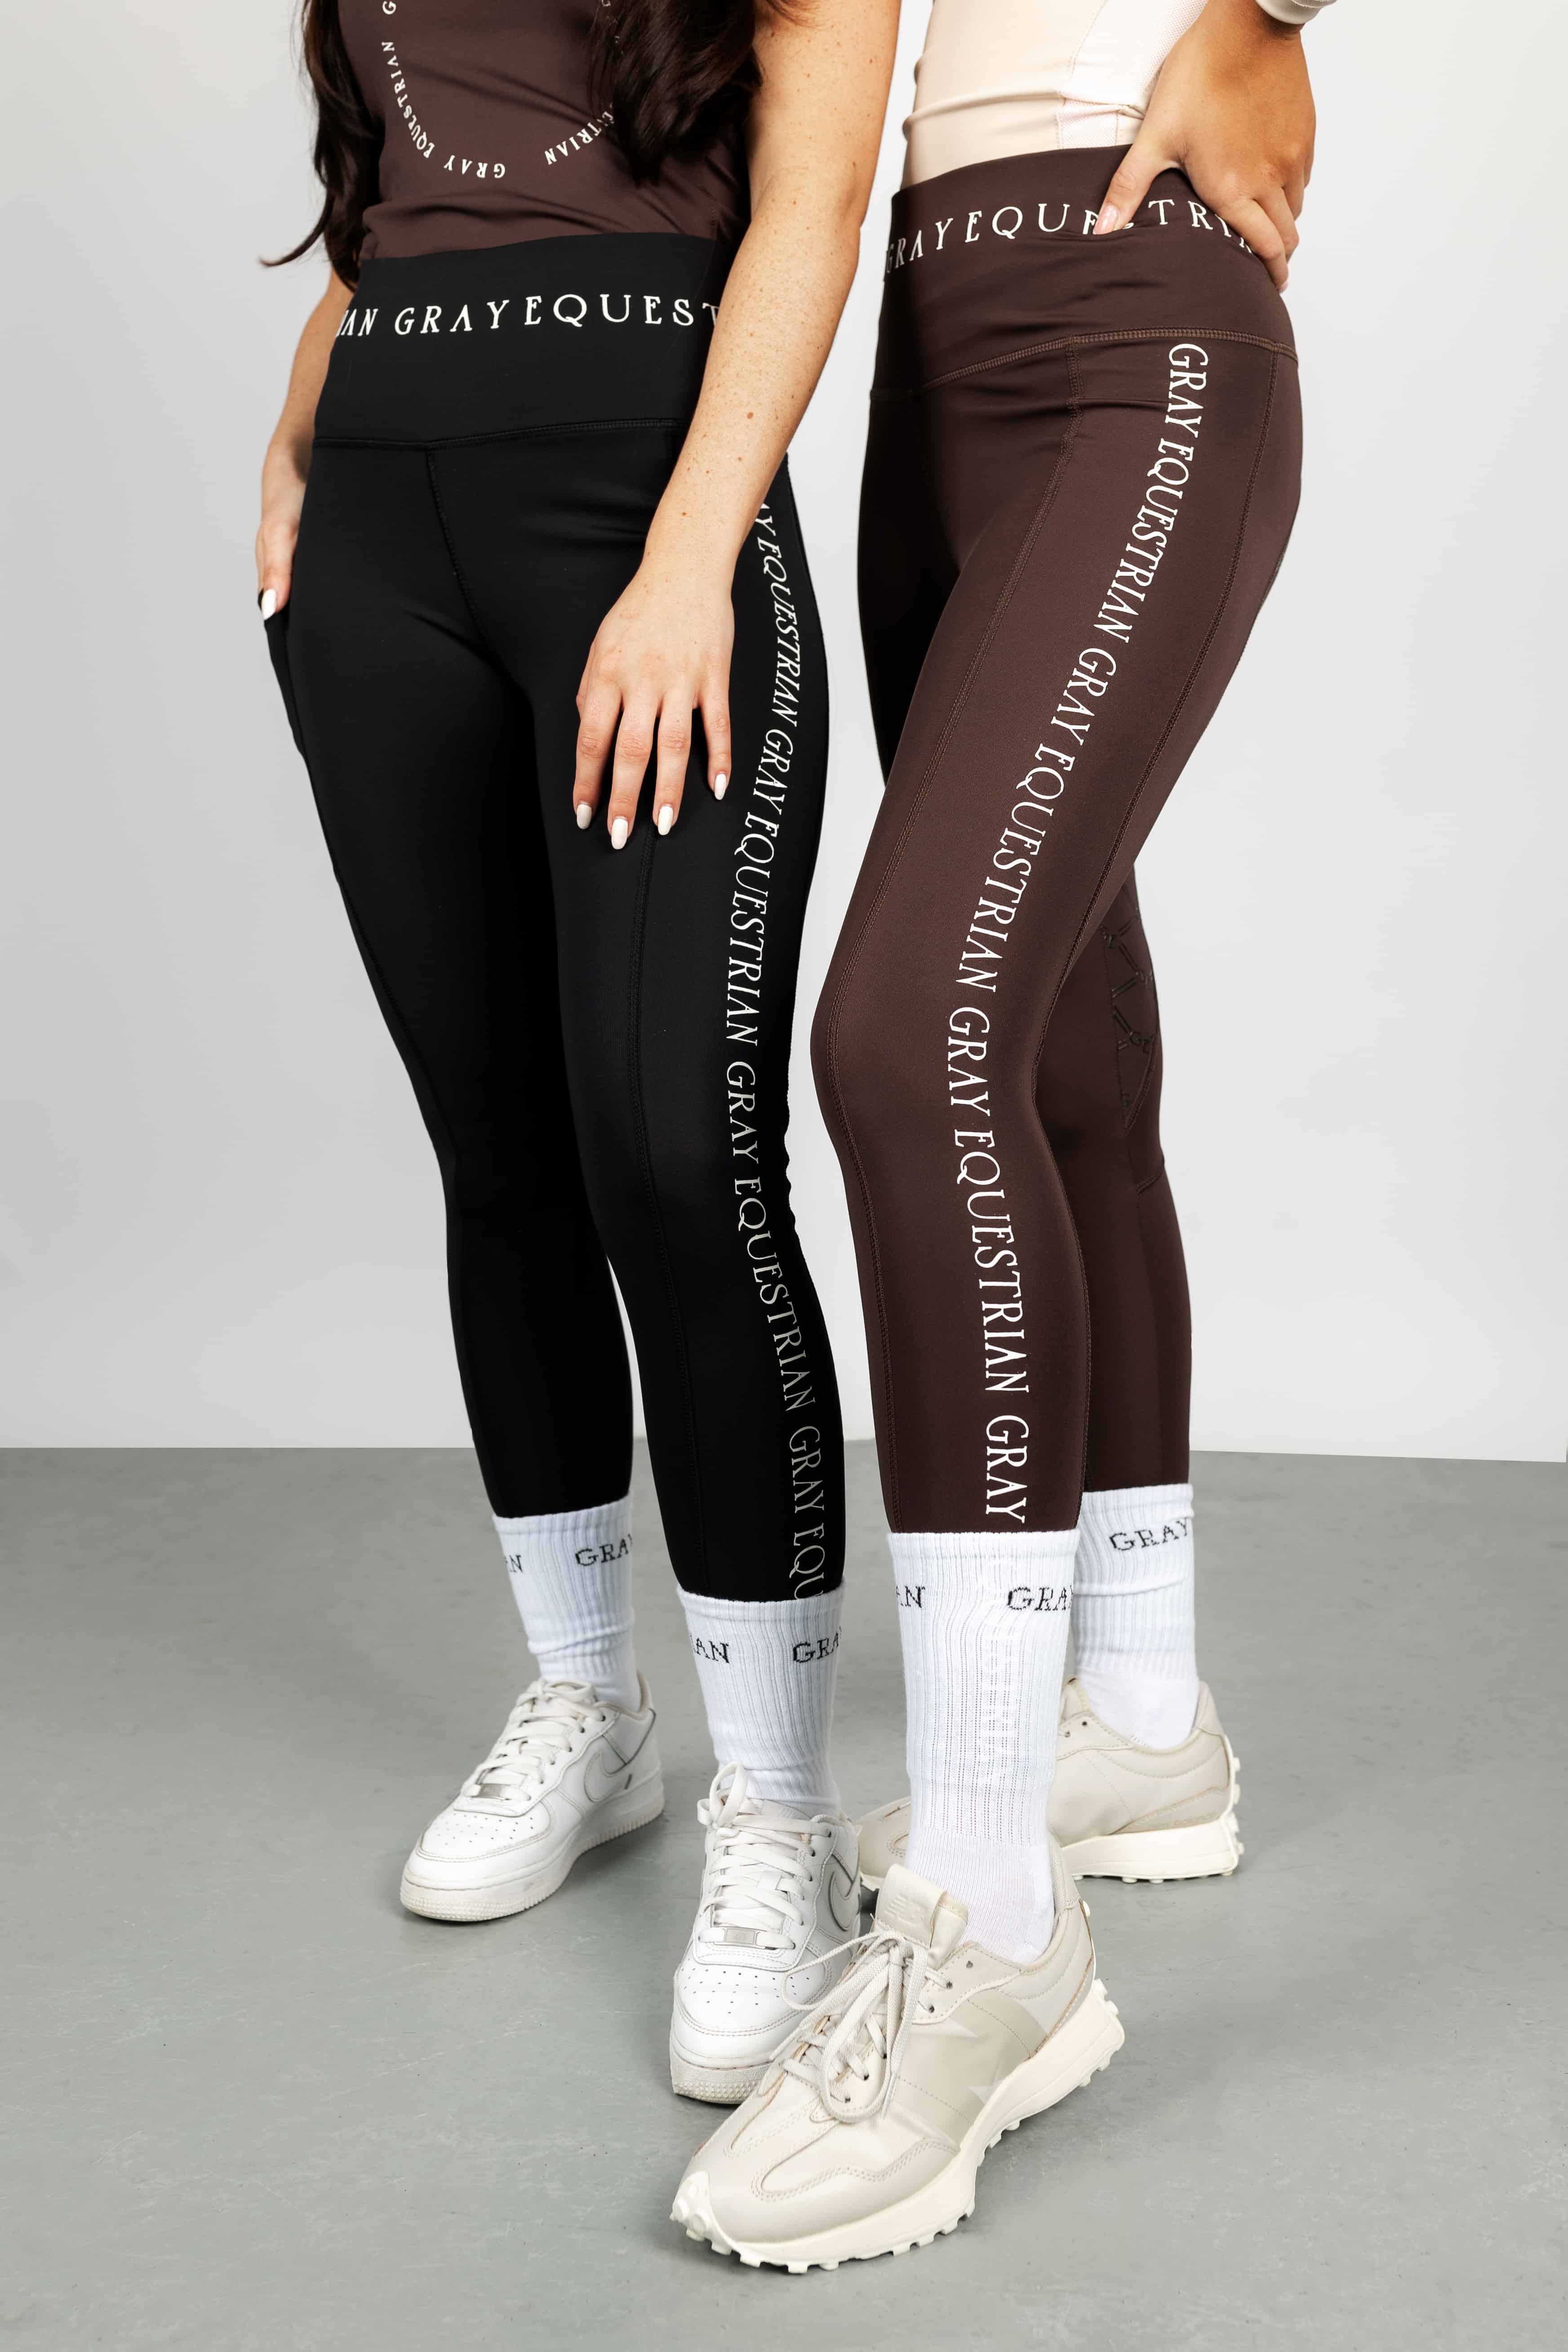 Two models wearing our riding leggings and white renew socks.